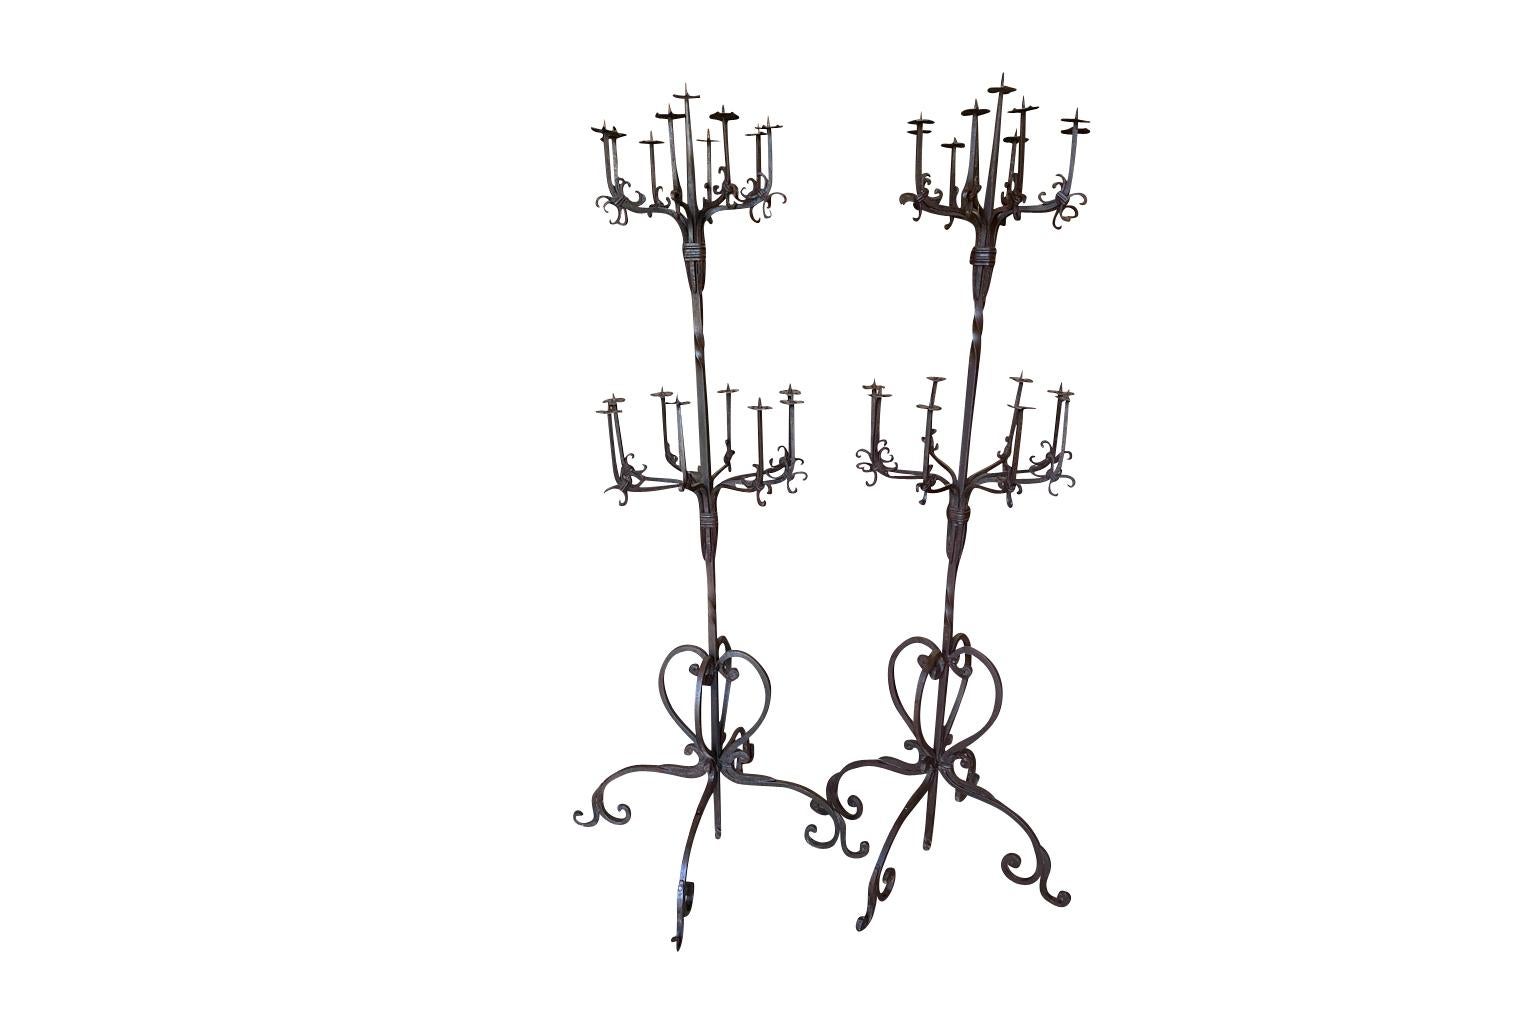 A very lovely early-20th century Italian Torcheres in beautifully crafted iron. Both measure 73 1/2